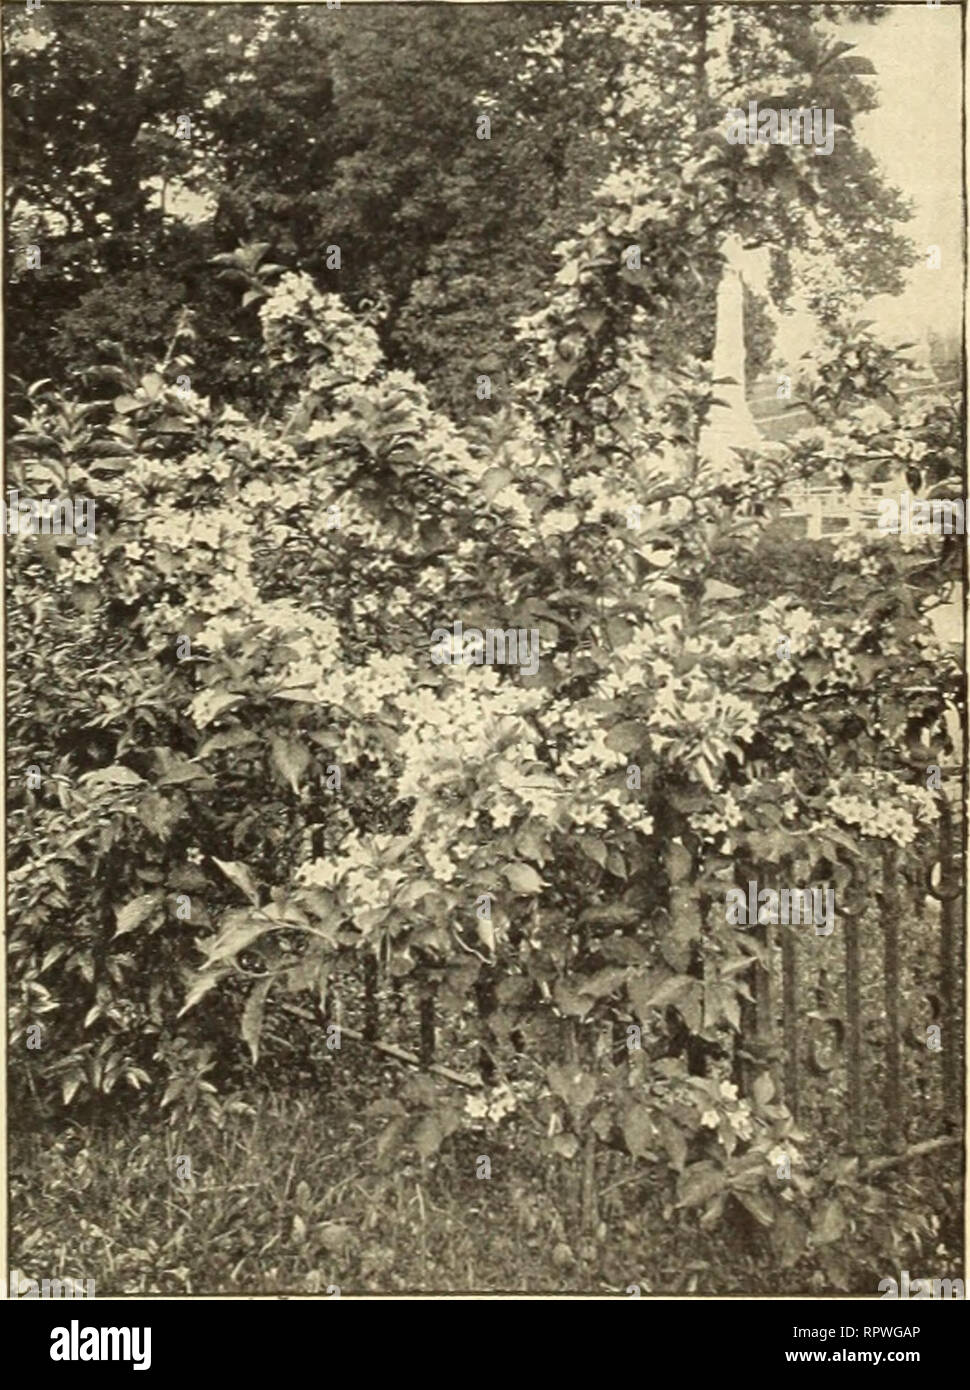 Allen's catalogue 1912 : choicest strawberry plants and other small fruits.  Nurseries (Horticulture) Maryland Salisbury Catalogs; Nursery stock  Maryland Salisbury Catalogs; Strawberries Maryland Salisbury Catalogs.  TRUE-TO-NAME ORNAMENTAL SHRUBS 45 ...